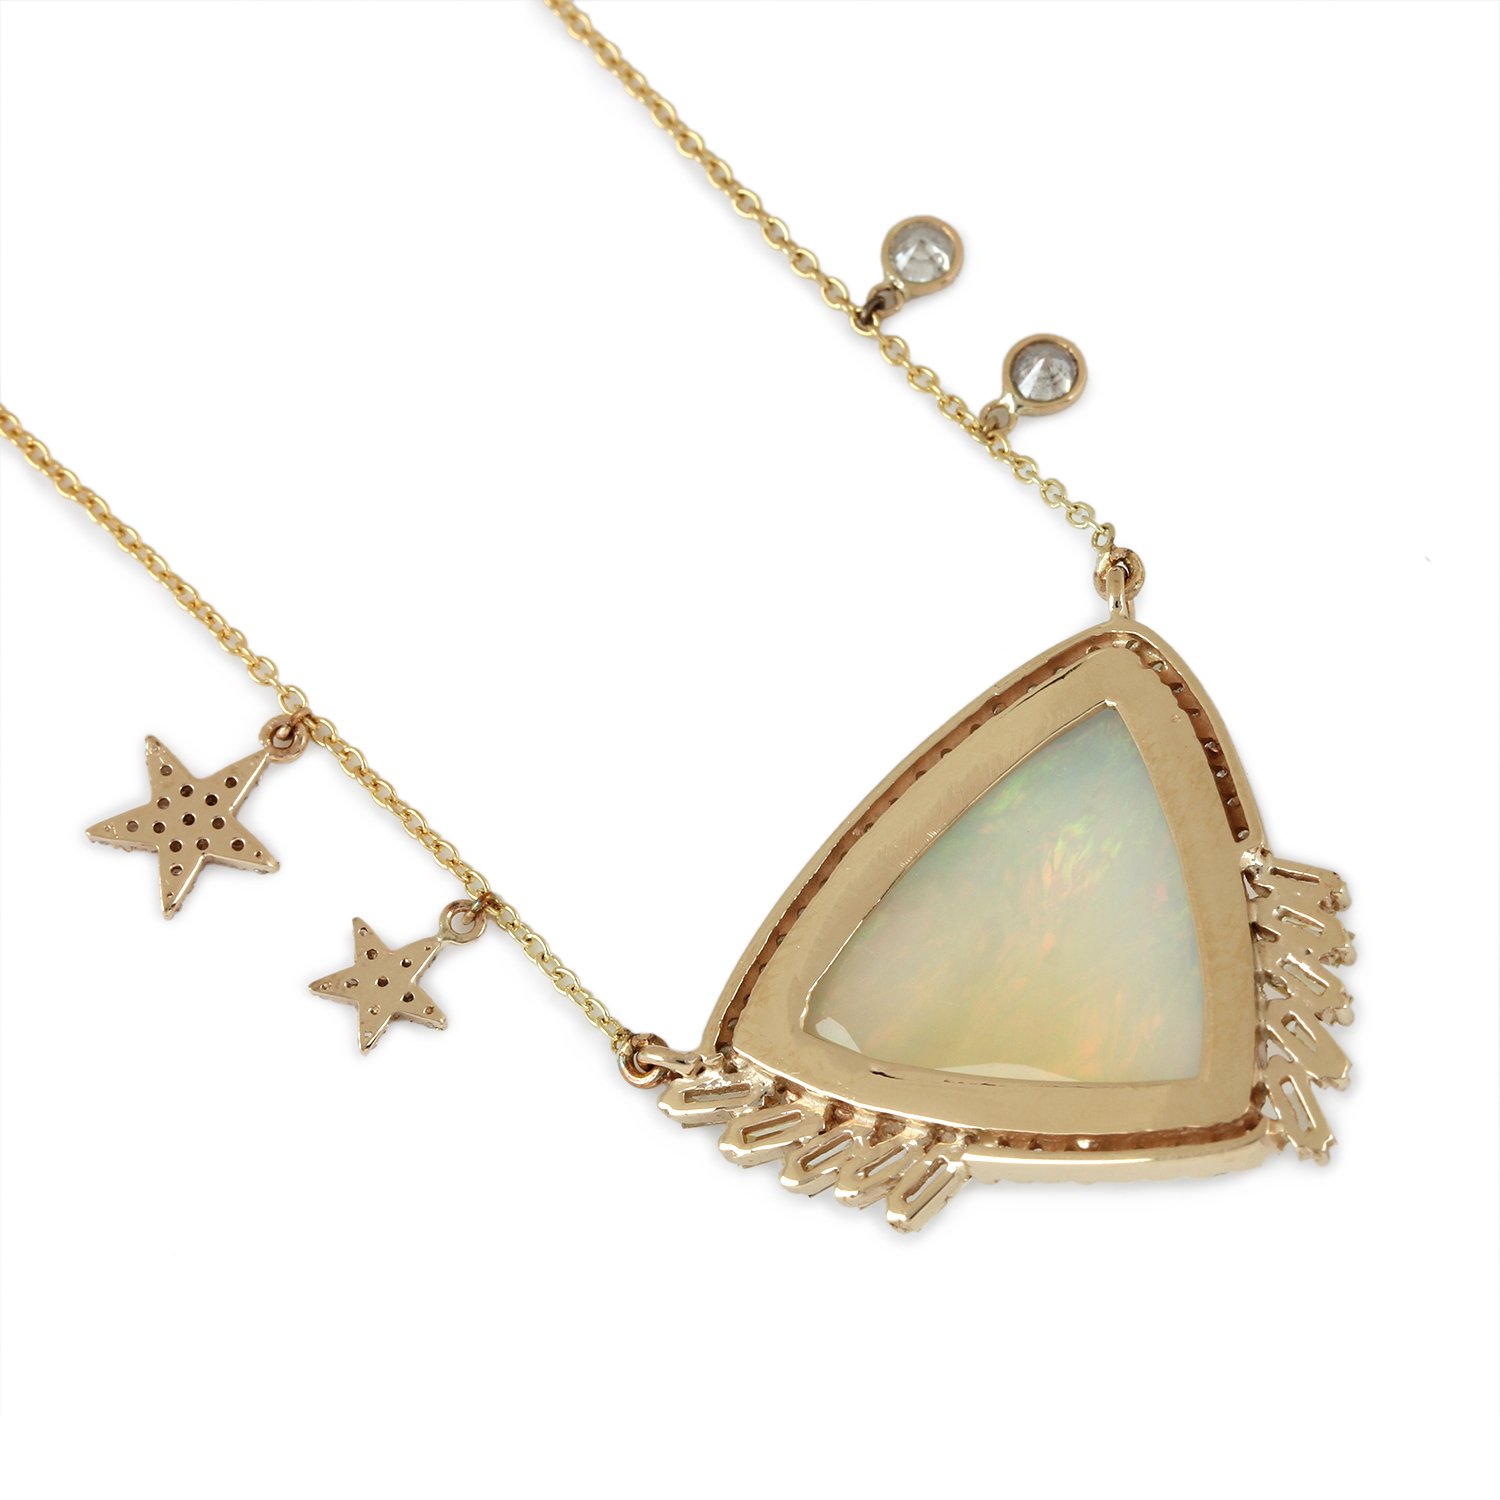 Opal Gemstone Pave Diamond Pendant Chain Necklace 14K Solid Gold Fine Jewelry